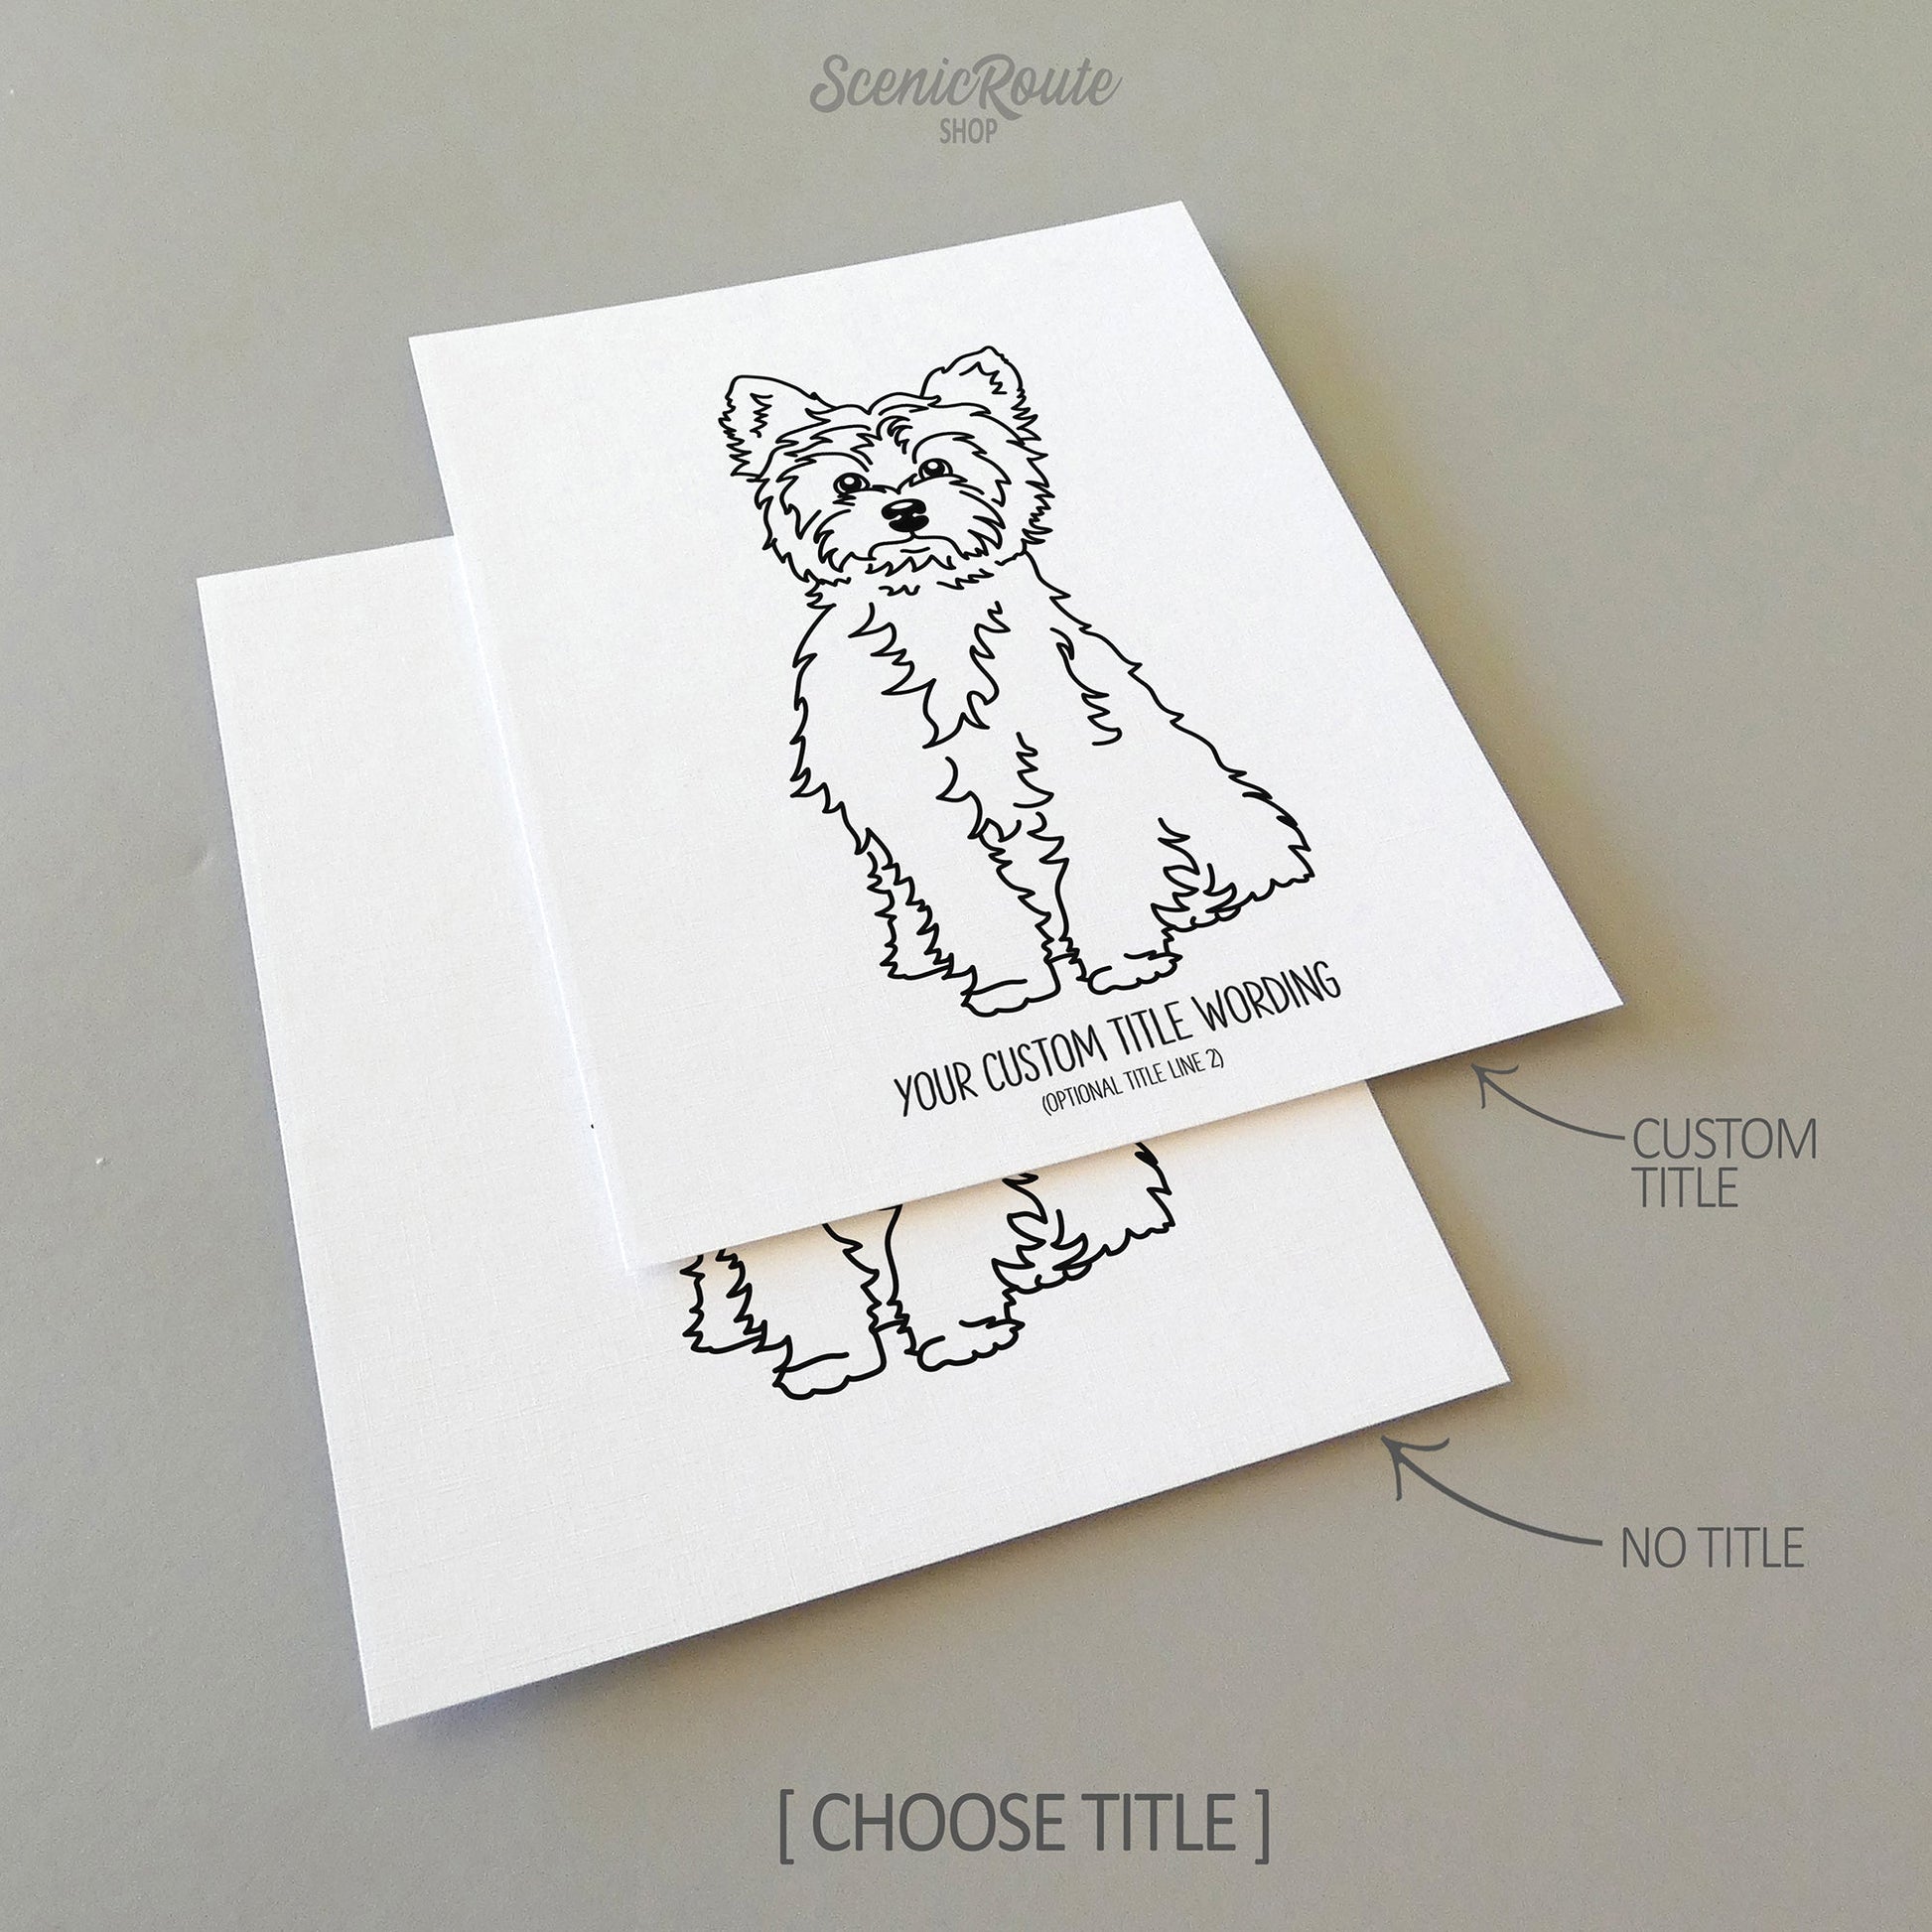 Two line art drawings of a Yorkshire Terrier dog on white linen paper with a gray background.  The pieces are shown with “No Title” and “Custom Title” options for the available art print options.